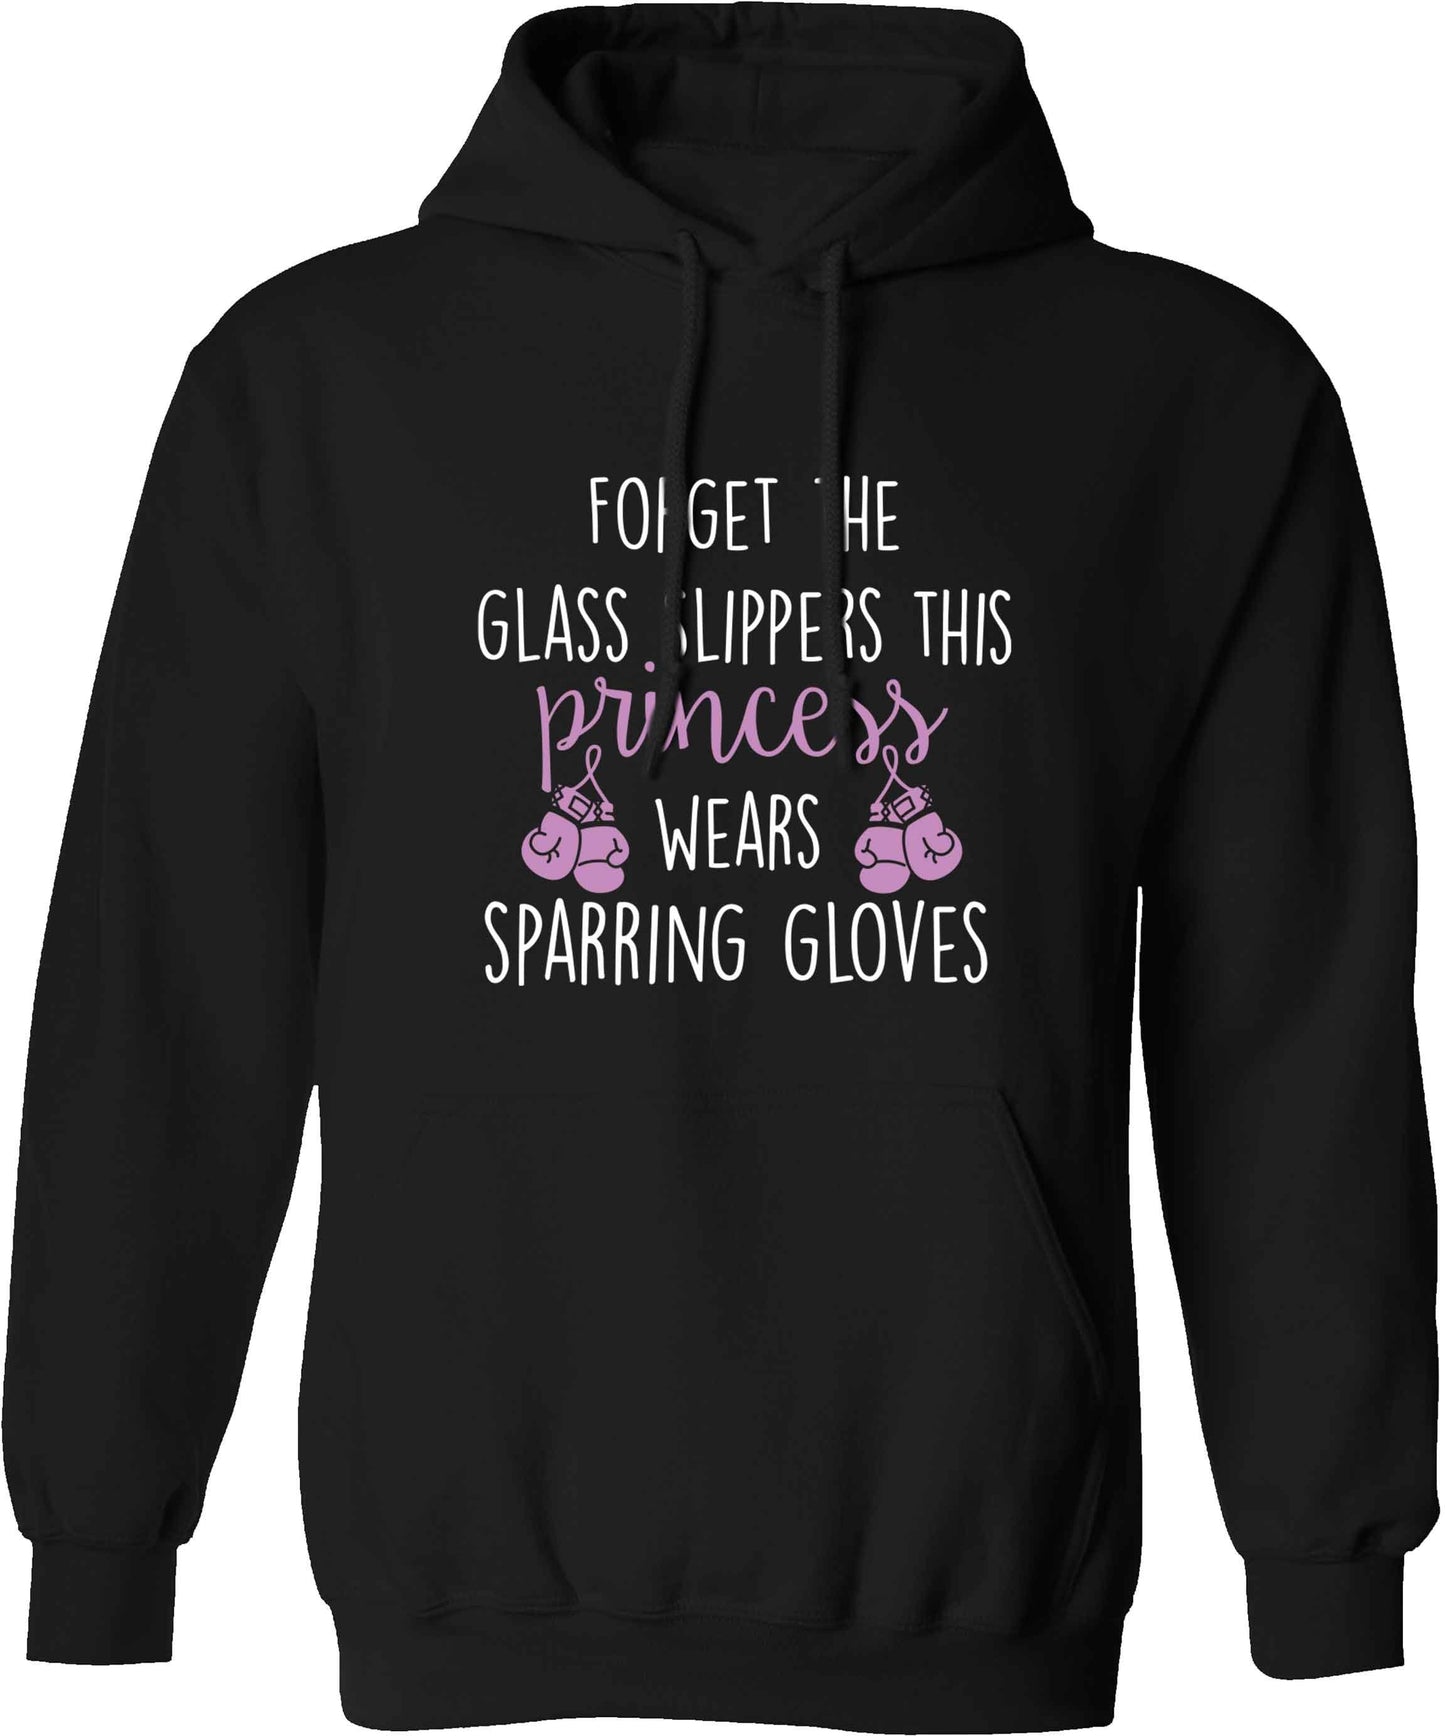 Forget the glass slippers this princess wears sparring gloves adults unisex black hoodie 2XL